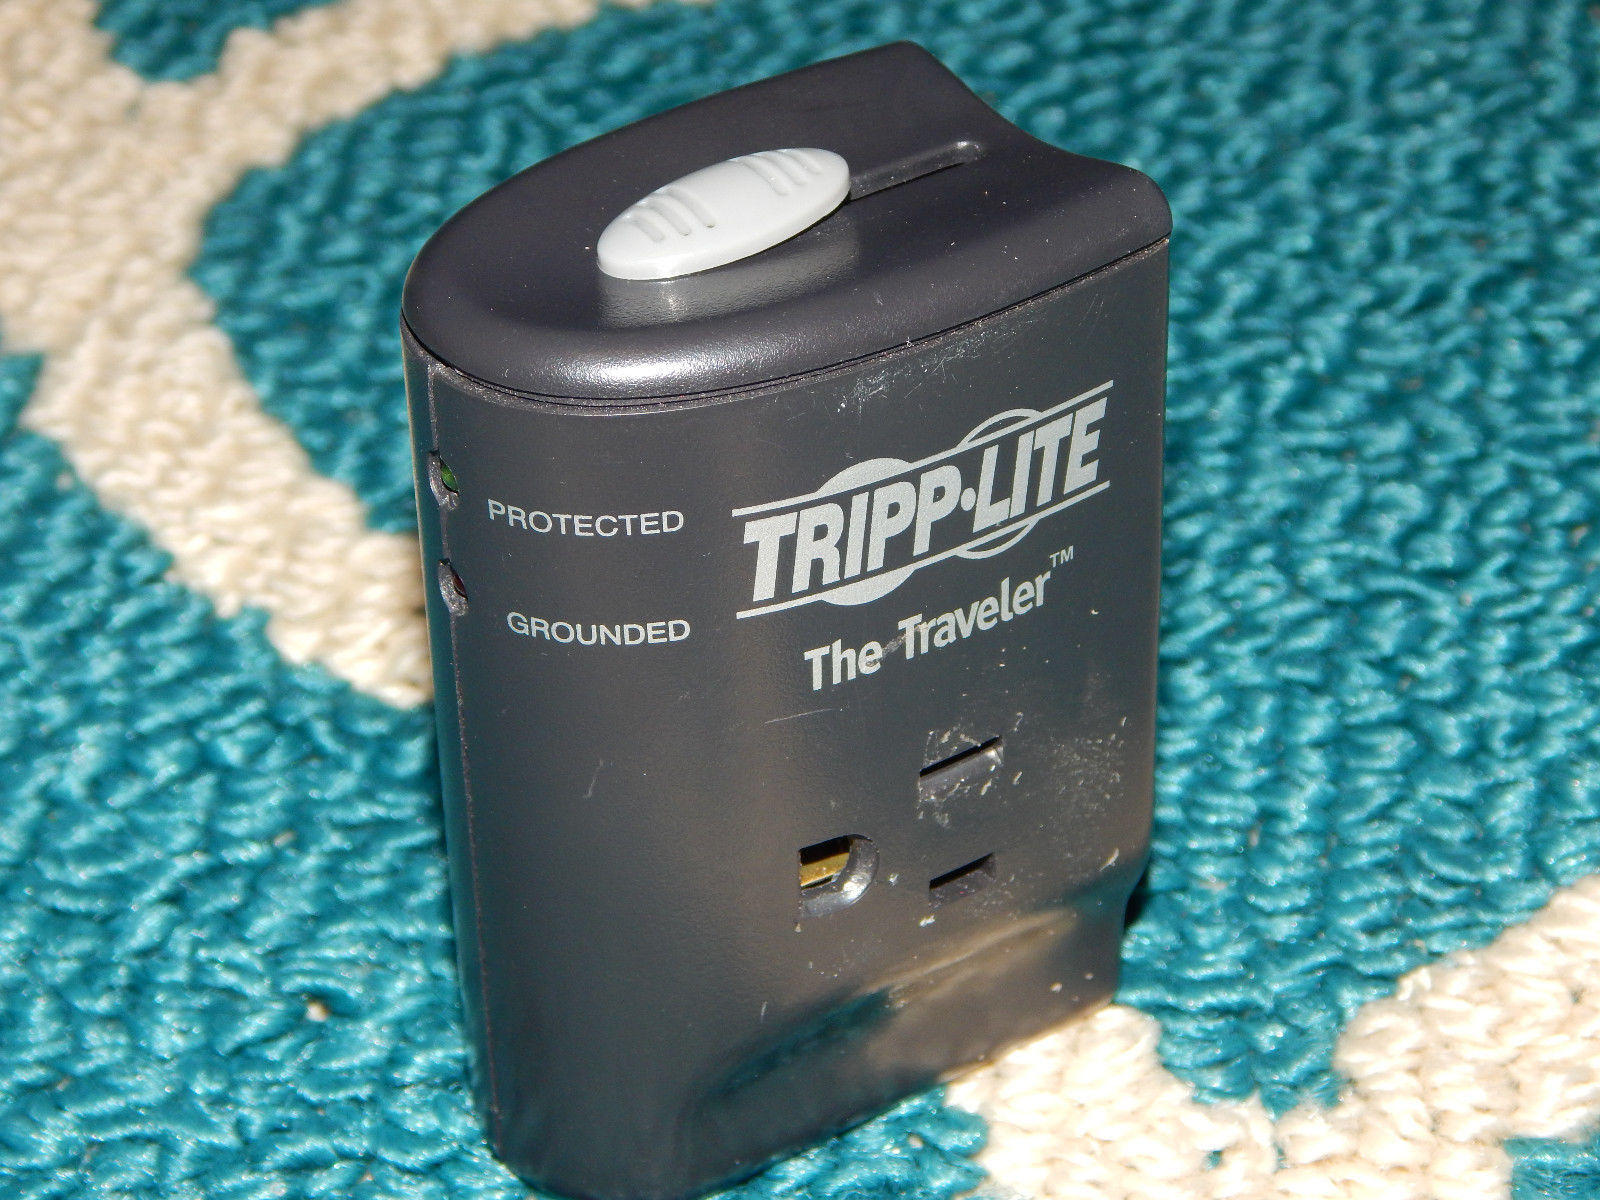 Primary image for Tripp-Lite The Traveler Notebook Portable Surge Protector Wall 2-Outlet